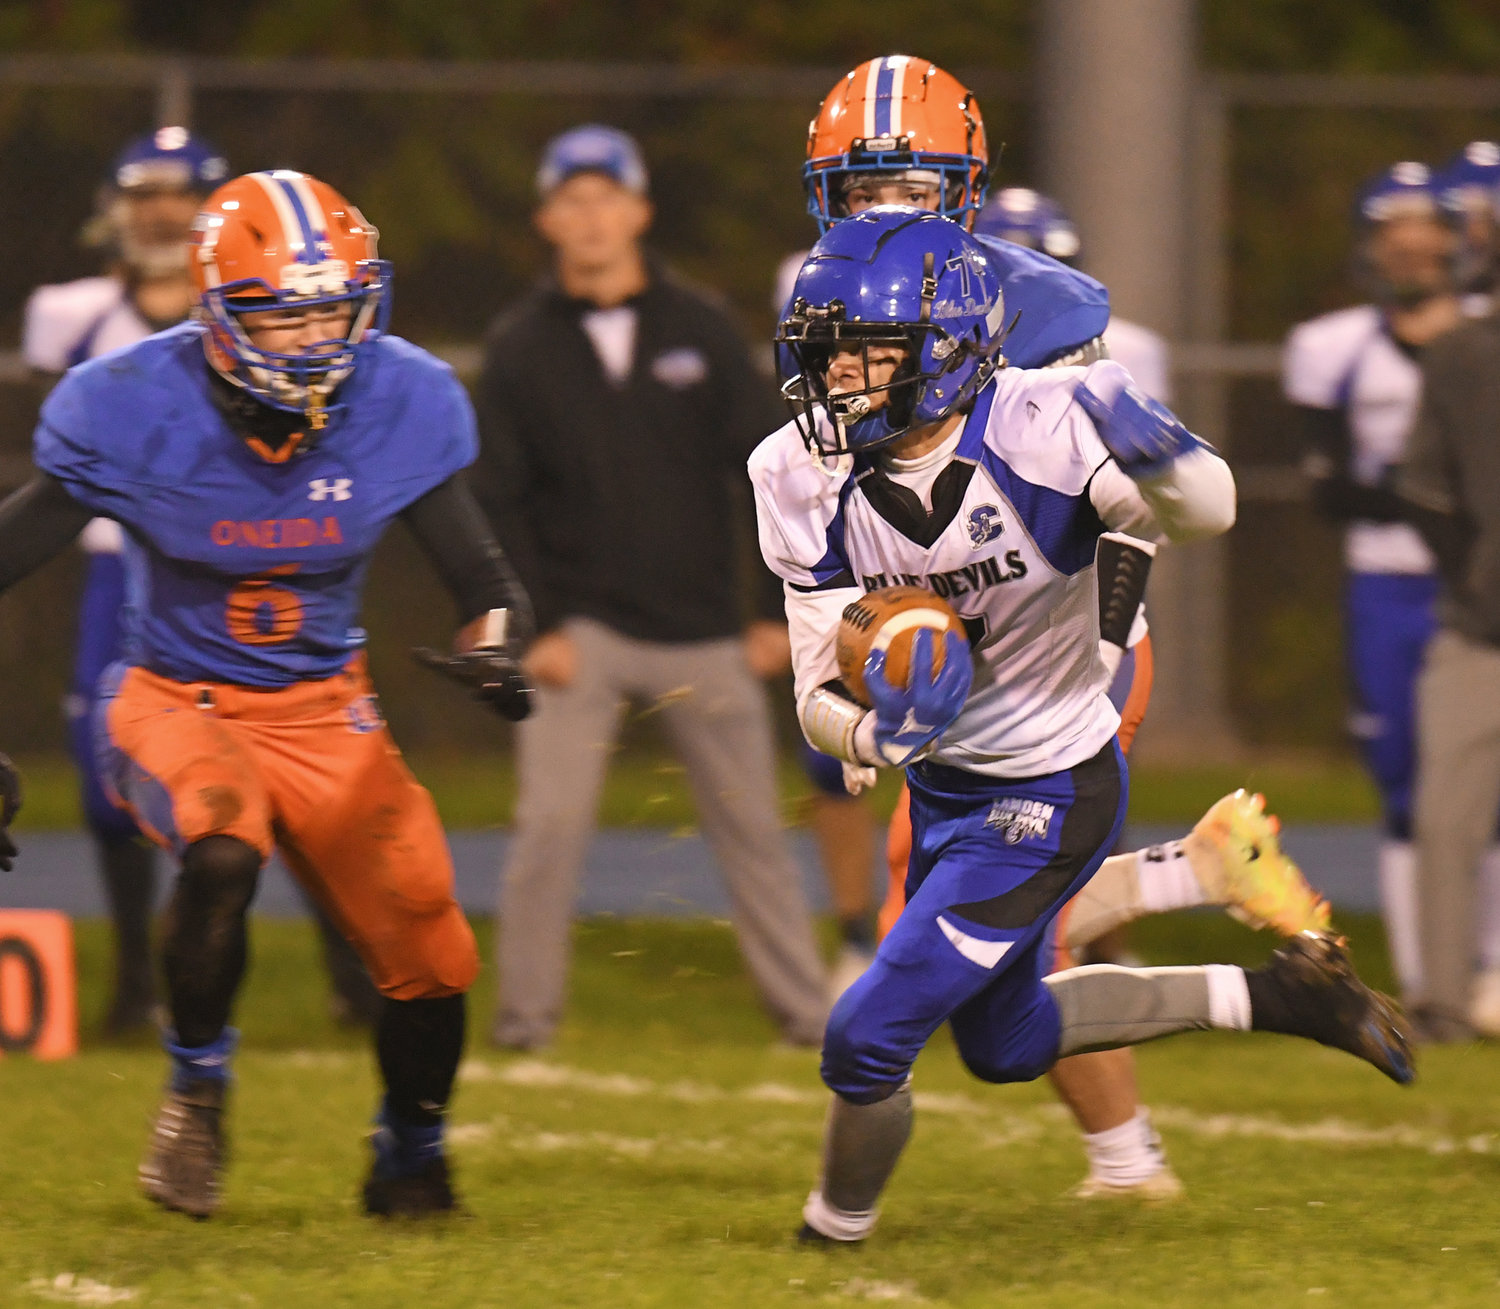 Camden's Trey Kimball weaves through traffic for some of his 85 rushing yards on Friday against Oneida. Kimball also had a touchdown in Camden's 39-20 victory to improve to 3-0.